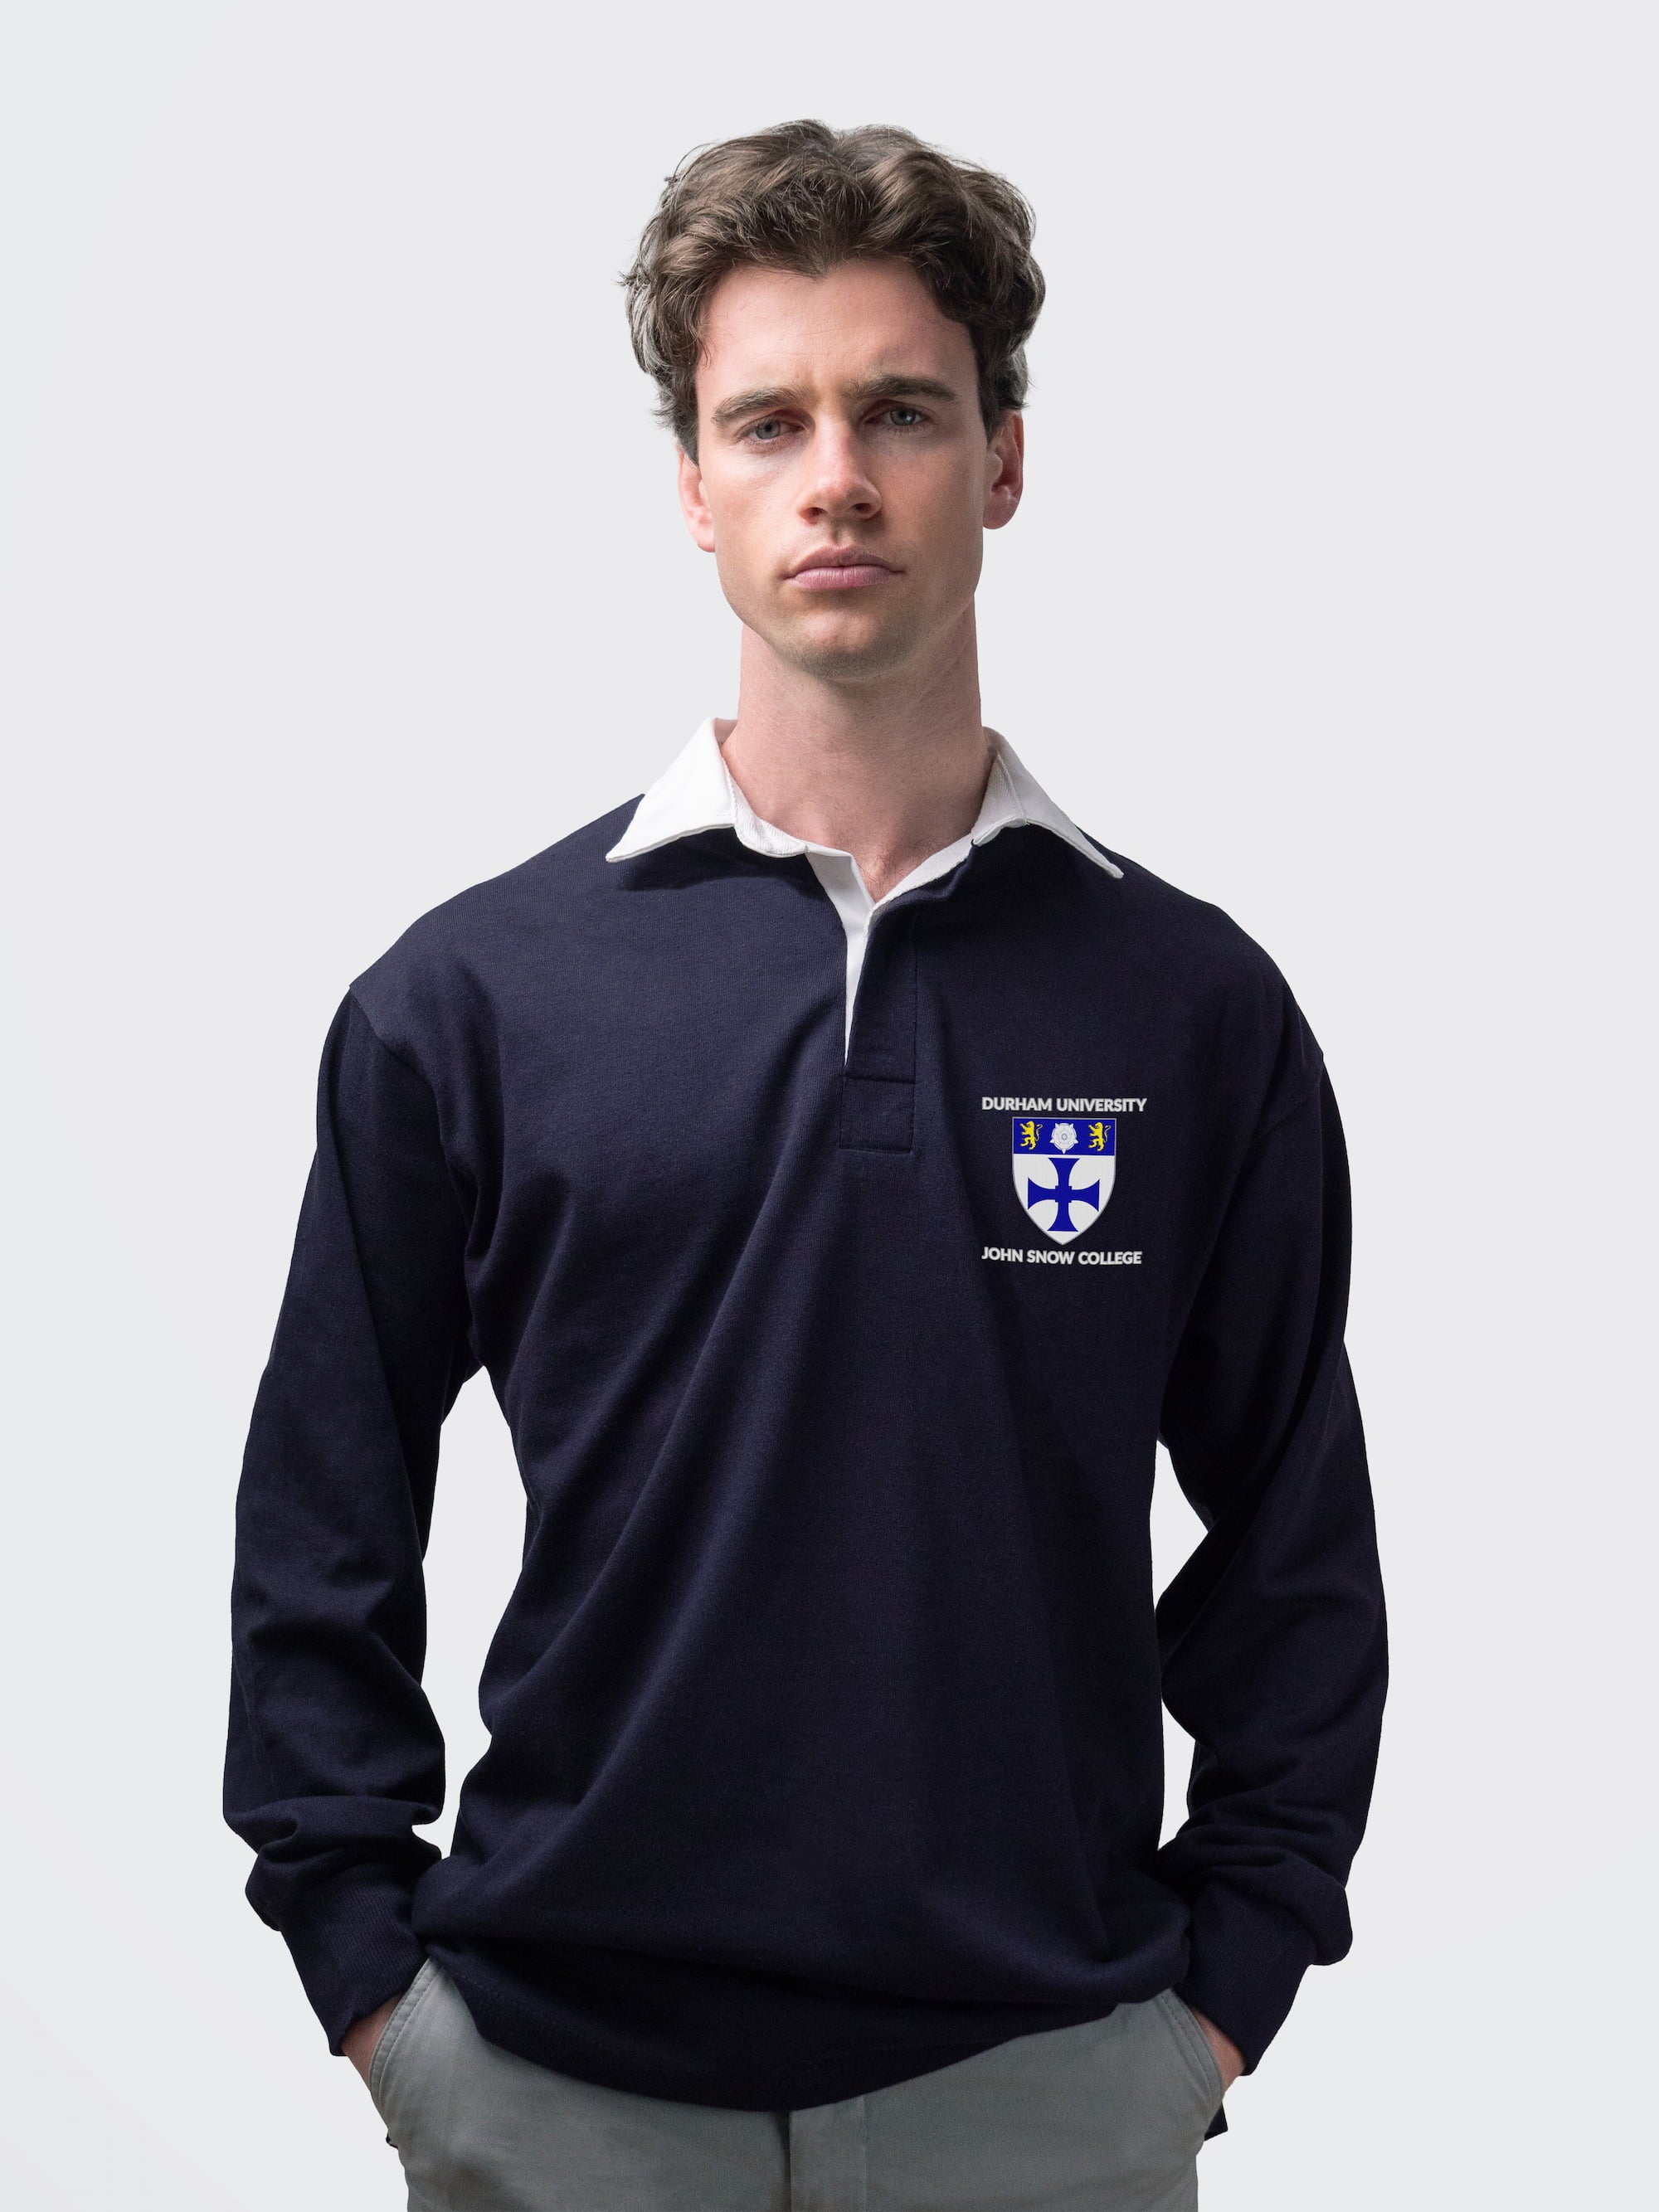 John Snow student wearing an embroidered mens rugby shirt in navy